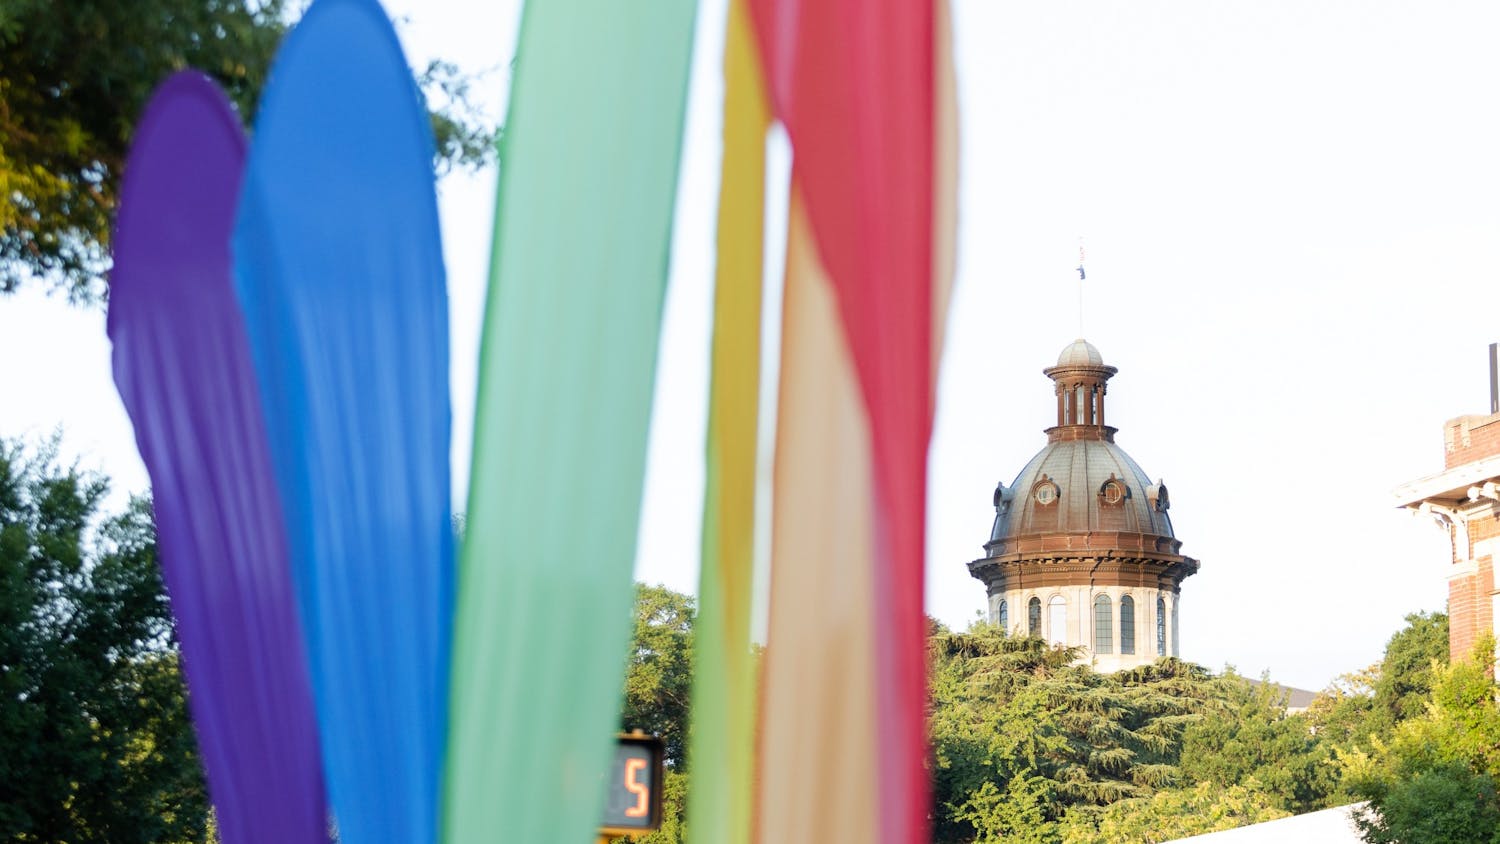 A picture of rainbow banners in front of the statehouse on June 4, 2022. The banners marked the location of Outfest, a showcase that focused on the LGBTQIA+ community with local vendors, businesses and talent during national Pride month.